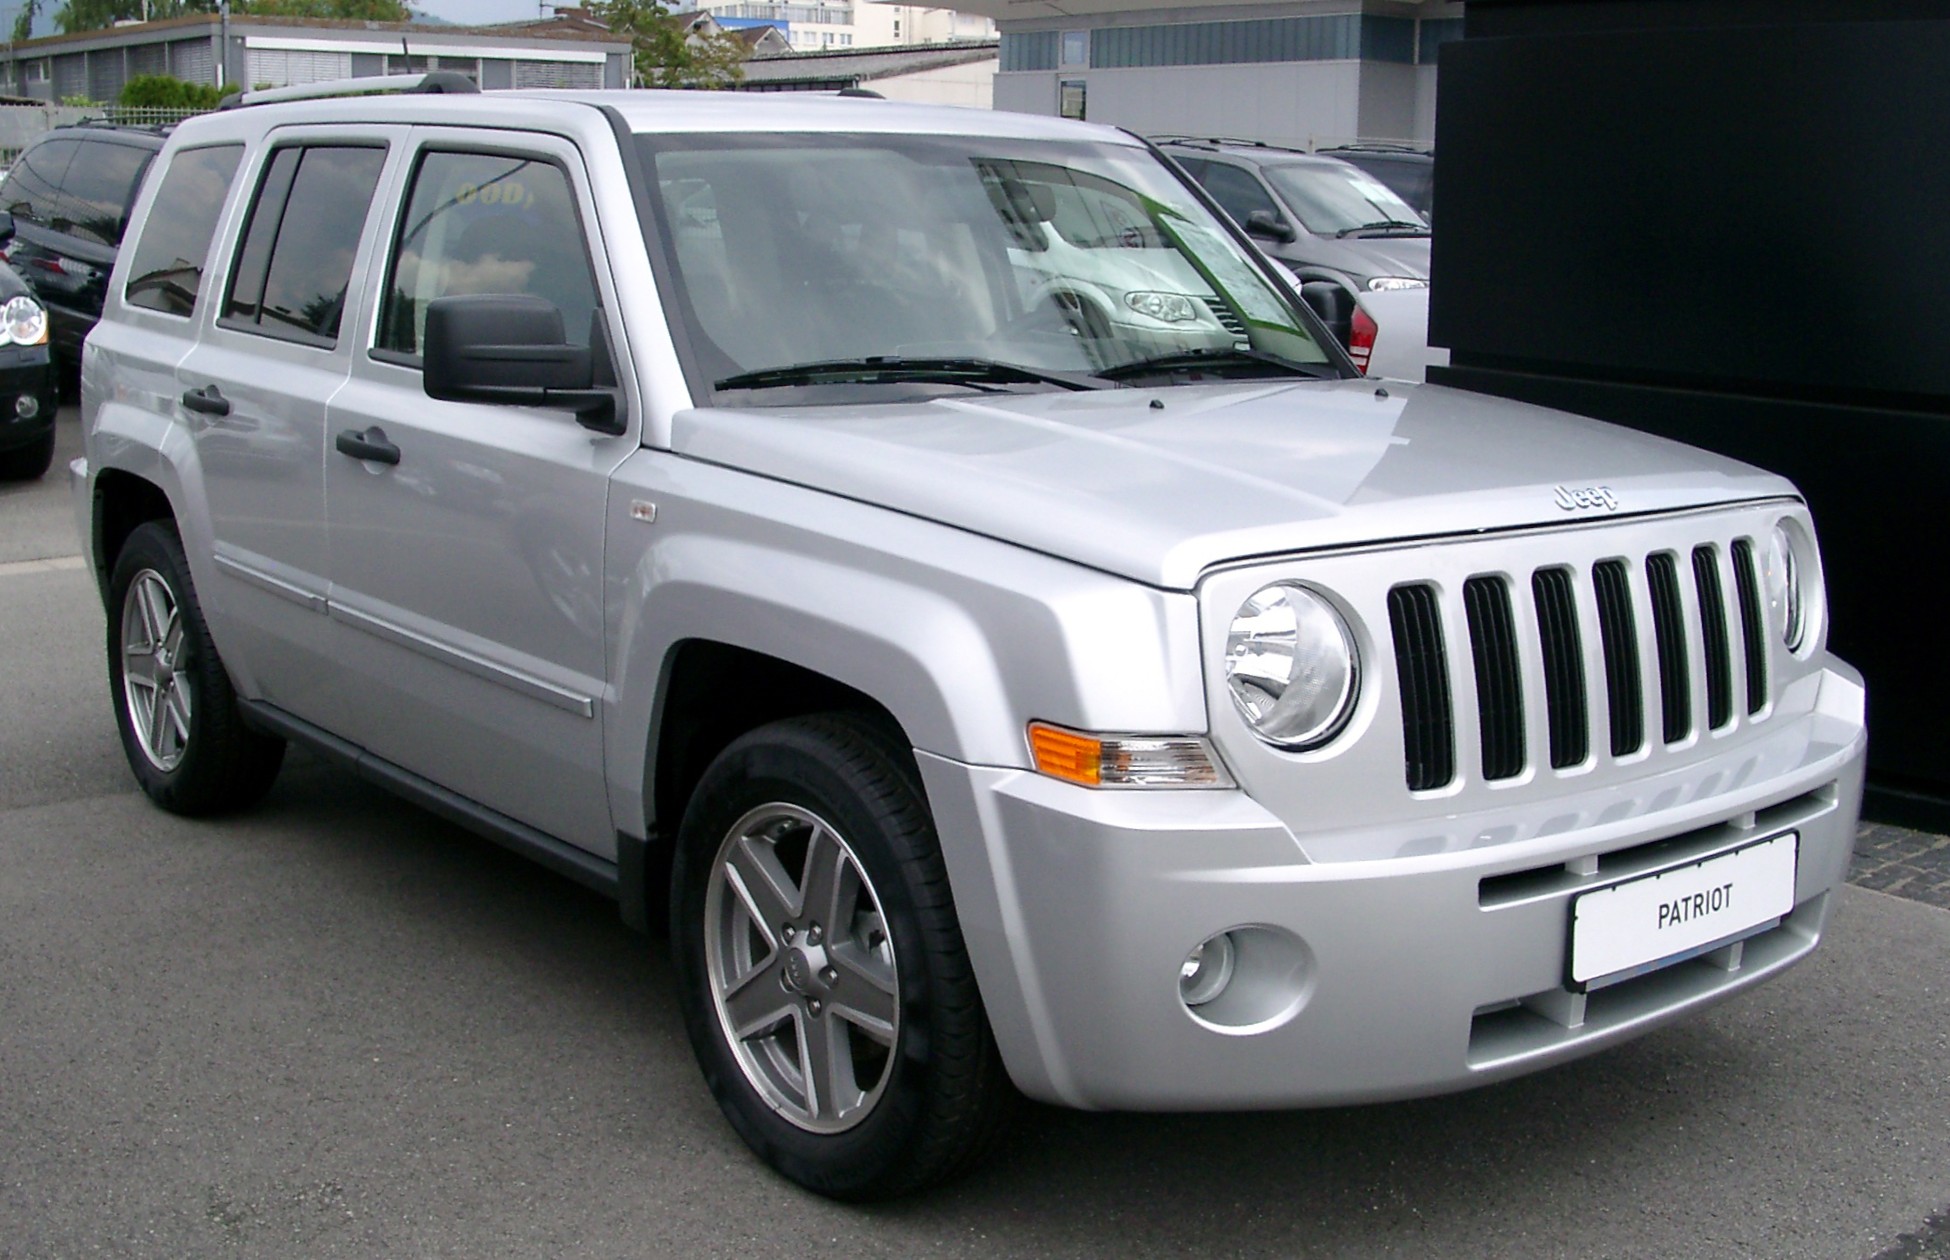 File:Jeep Patriot front 20080727.jpg - Wikimedia Commons